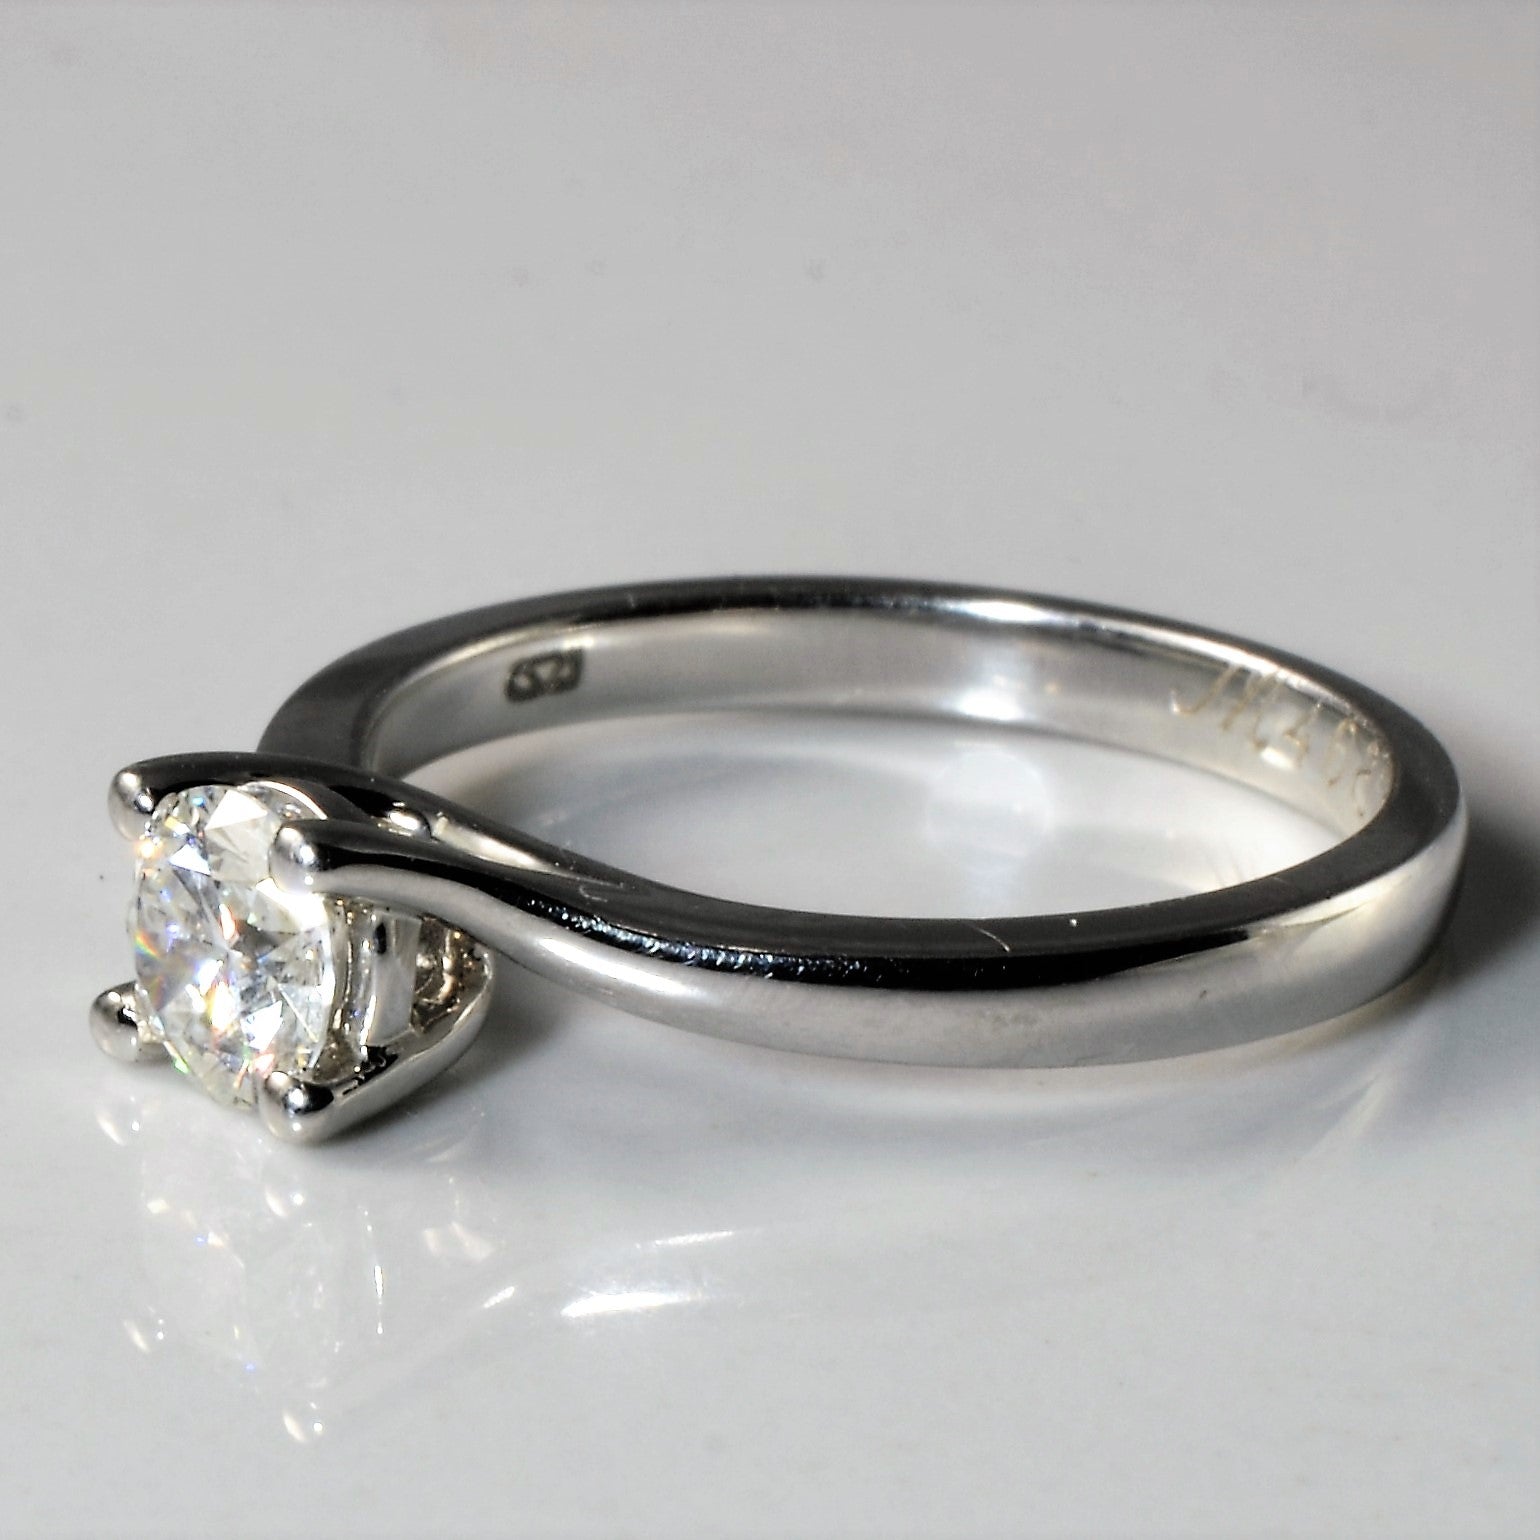 Solitaire Bypass Diamond Engagement Ring | 0.51ct | SZ 6.25 |